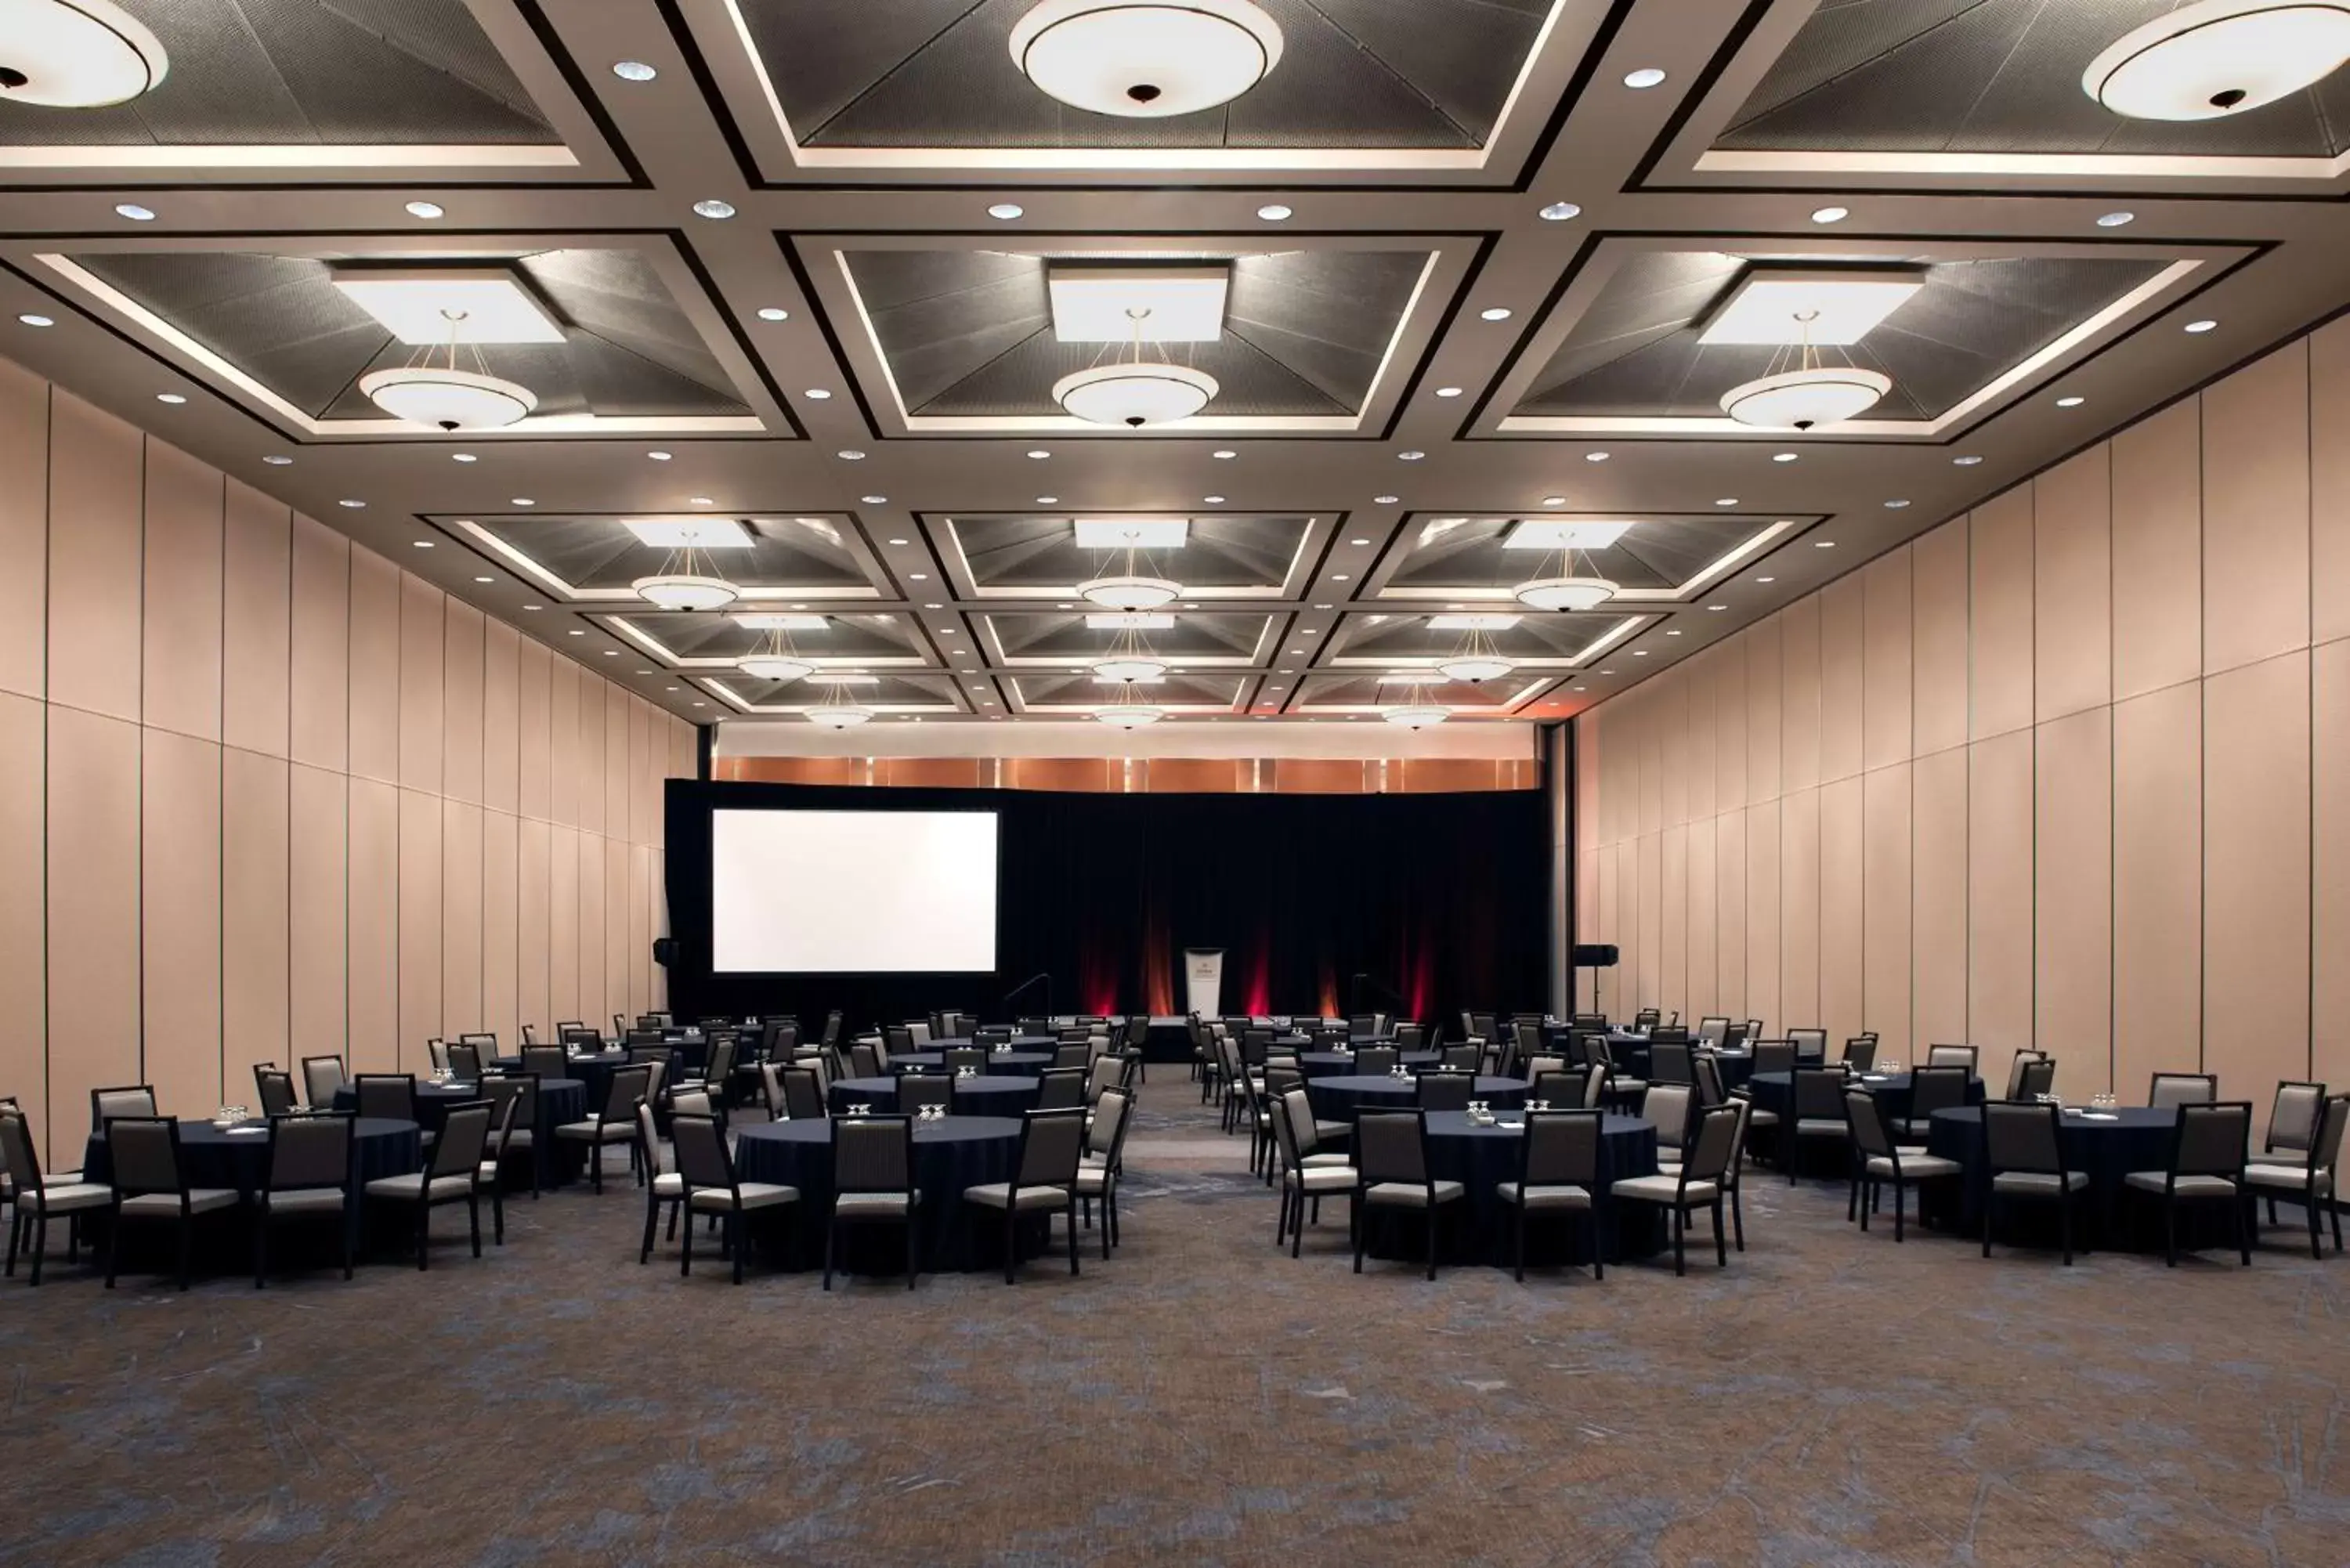 Meeting/conference room in Hilton Suites Toronto-Markham Conference Centre & Spa